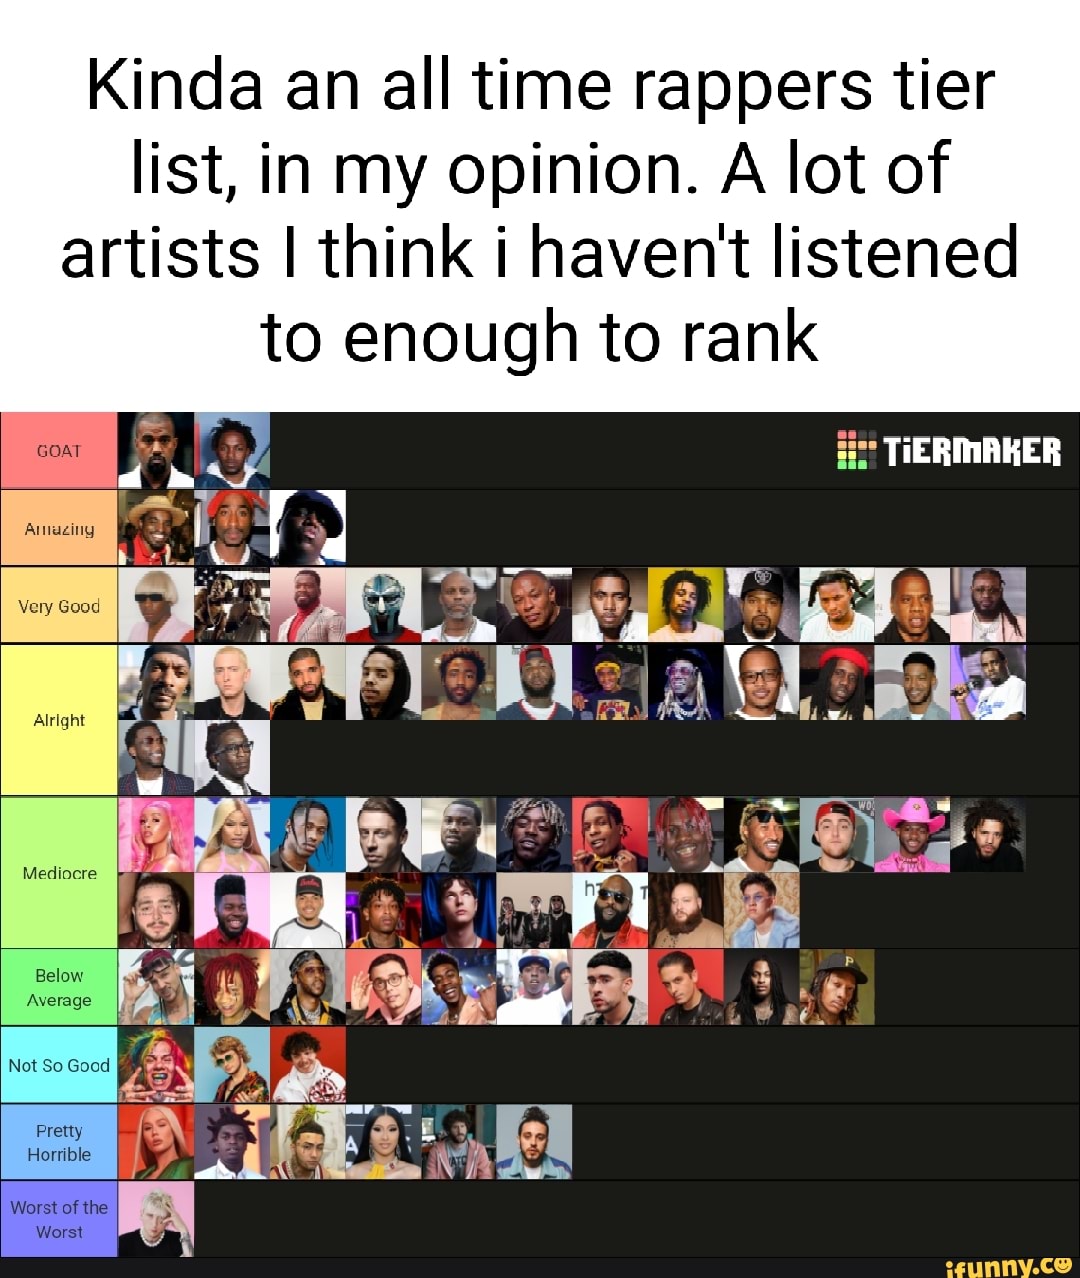 Tier list (this is just my opinion)